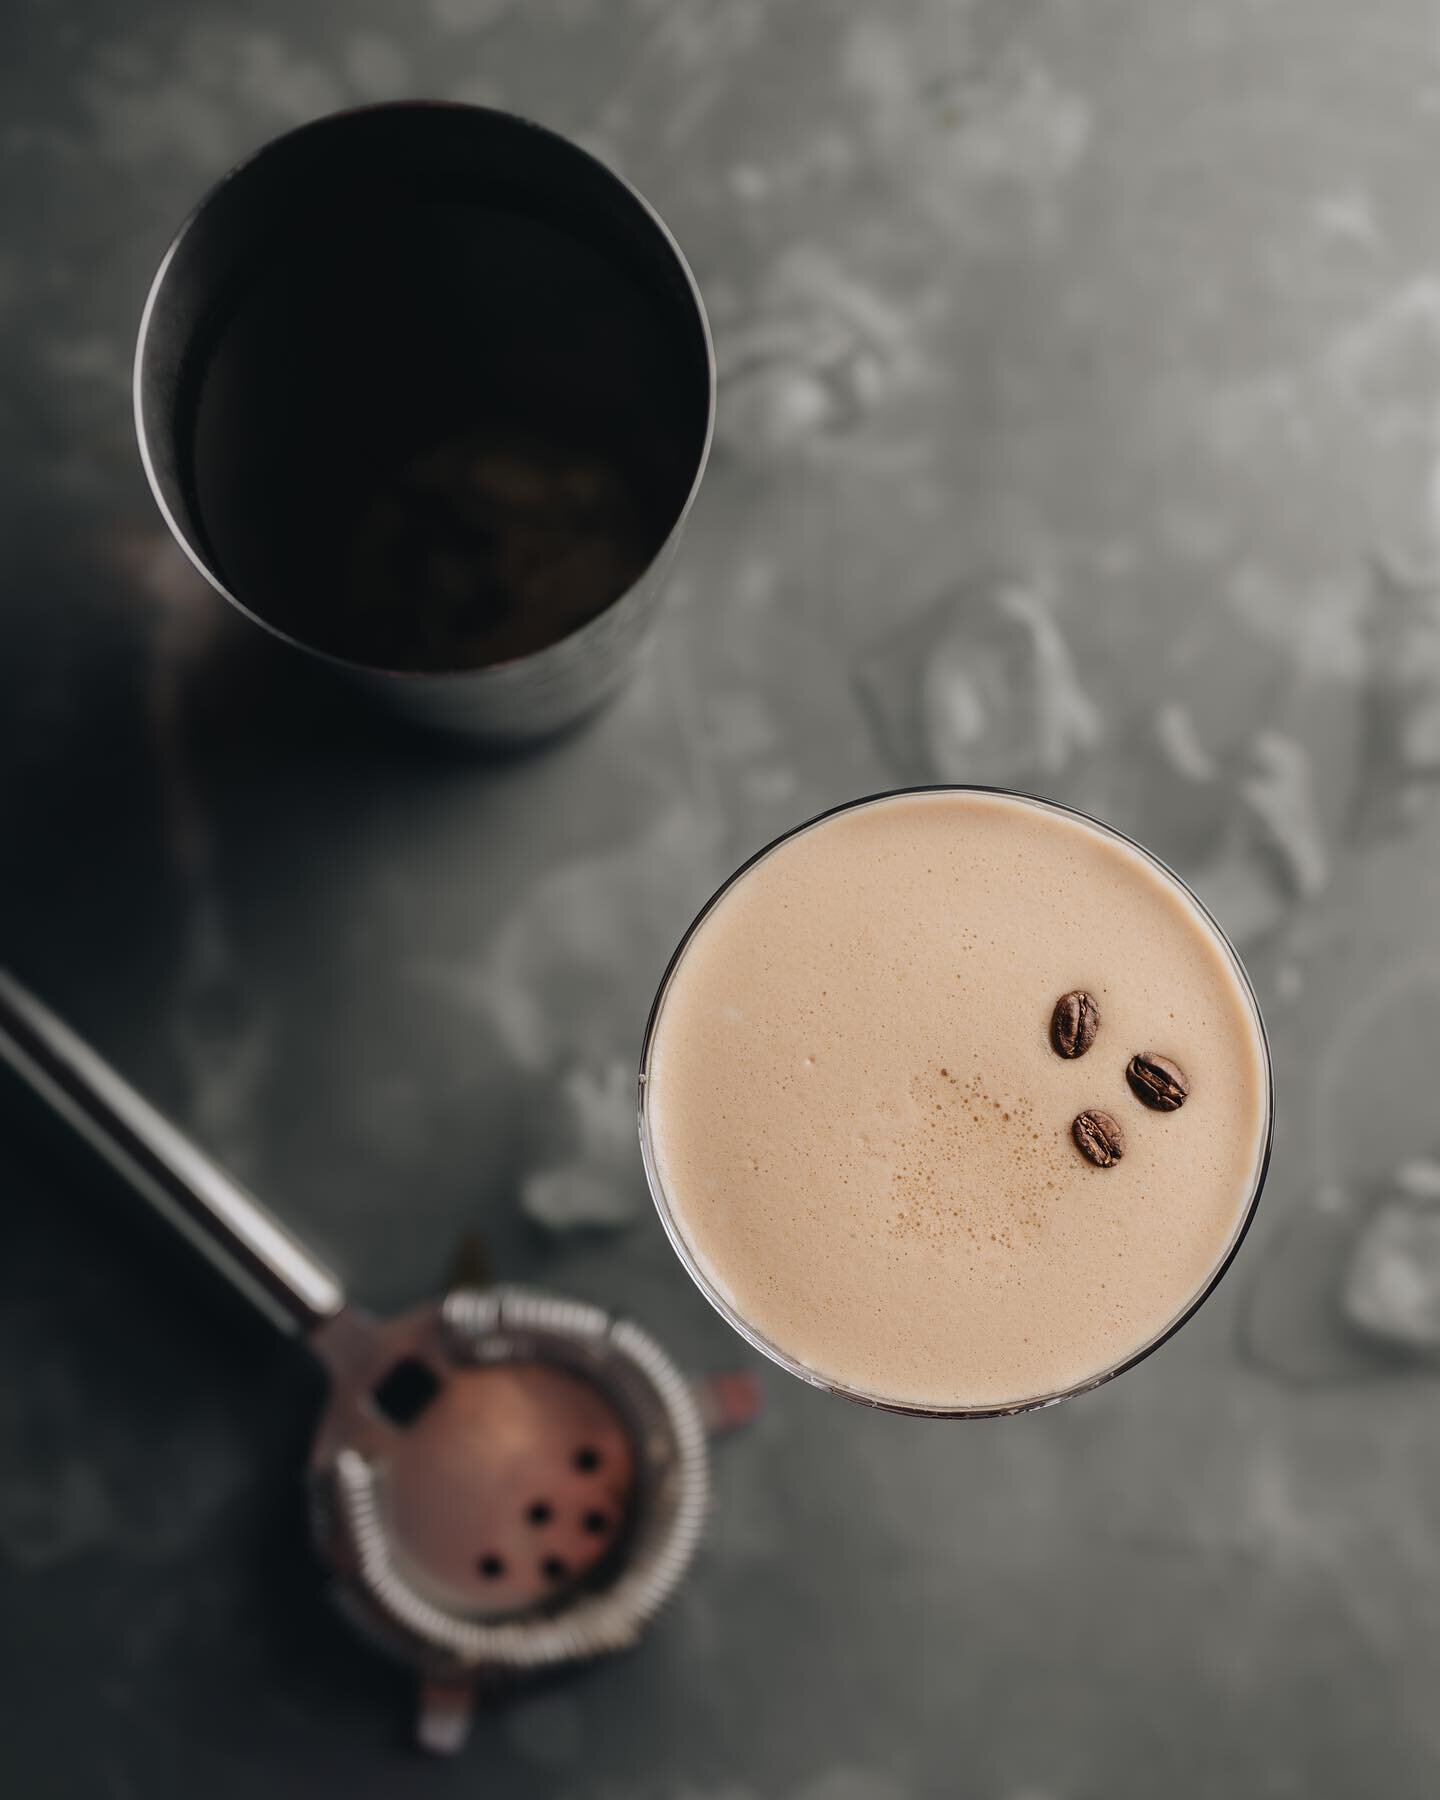 We&rsquo;re dreaming of the weekend already with our delicious espresso martinis! There are tables available in Brigg for Saturday evening dining so why not treat yourself to our mouthwatering small plates, or a perfectly cooked steak for date night